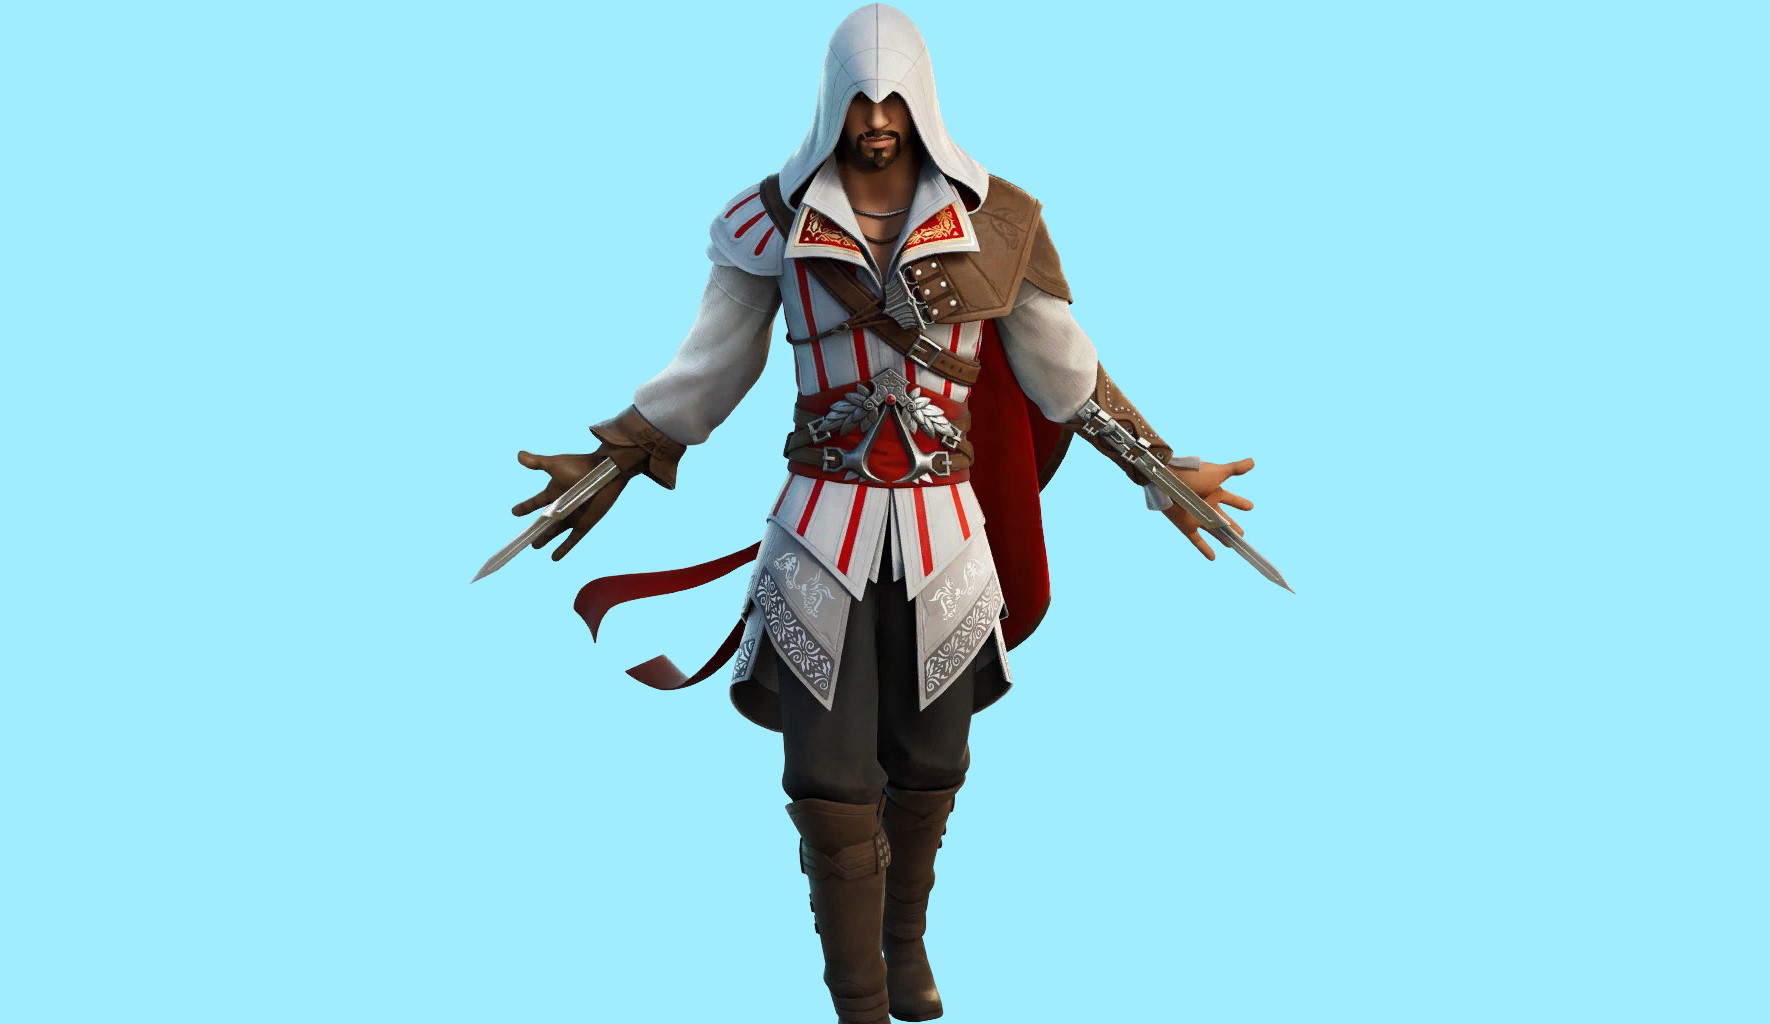  It looks like Assassin's Creed's Ezio is coming to Fortnite 